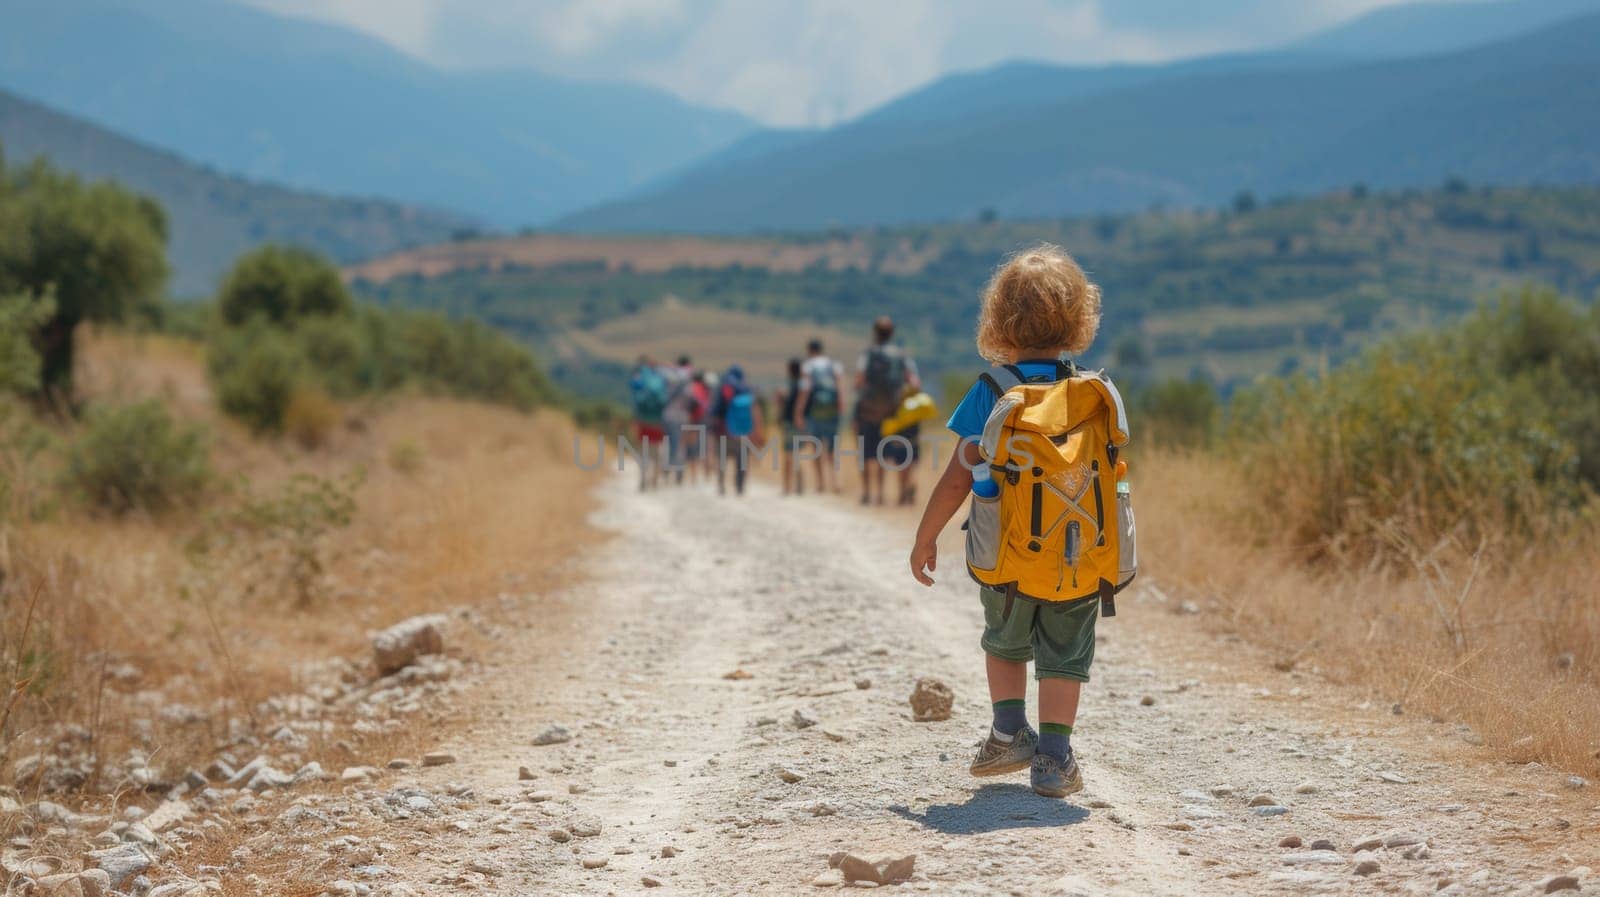 A group of a child with yellow backpack walking down dirt road